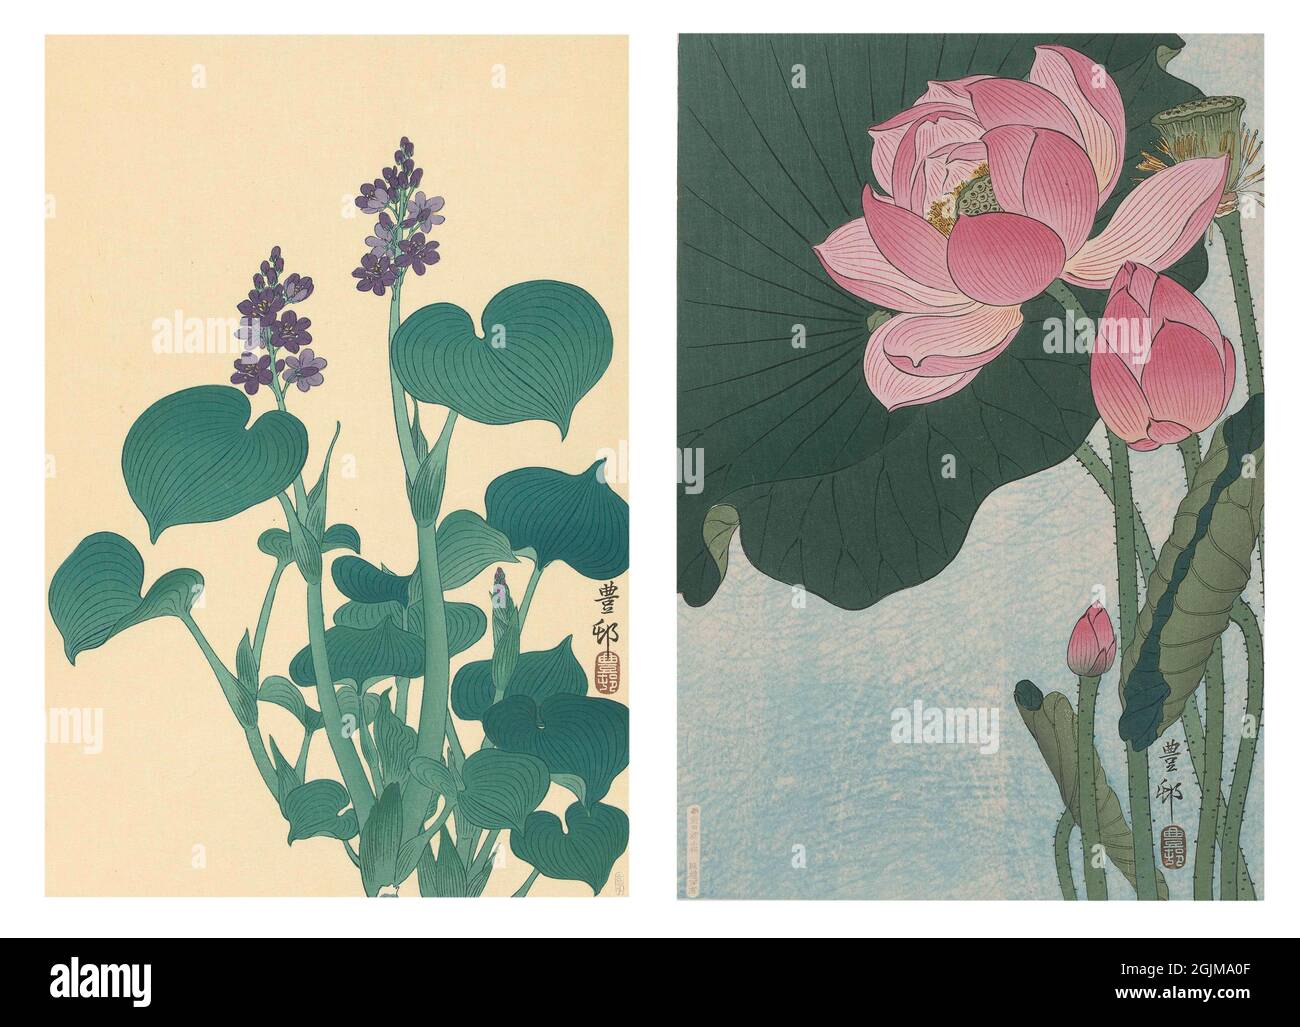 Unique optimised and enhanced arrangement of two early twentieth century (1920-30) Japanese woodcut illustrations.  From. left to right: 1. Flowering hostaF with small purple flowers and large green leaves 2. Blooming pink lotus flower against green foliage. Stock Photo